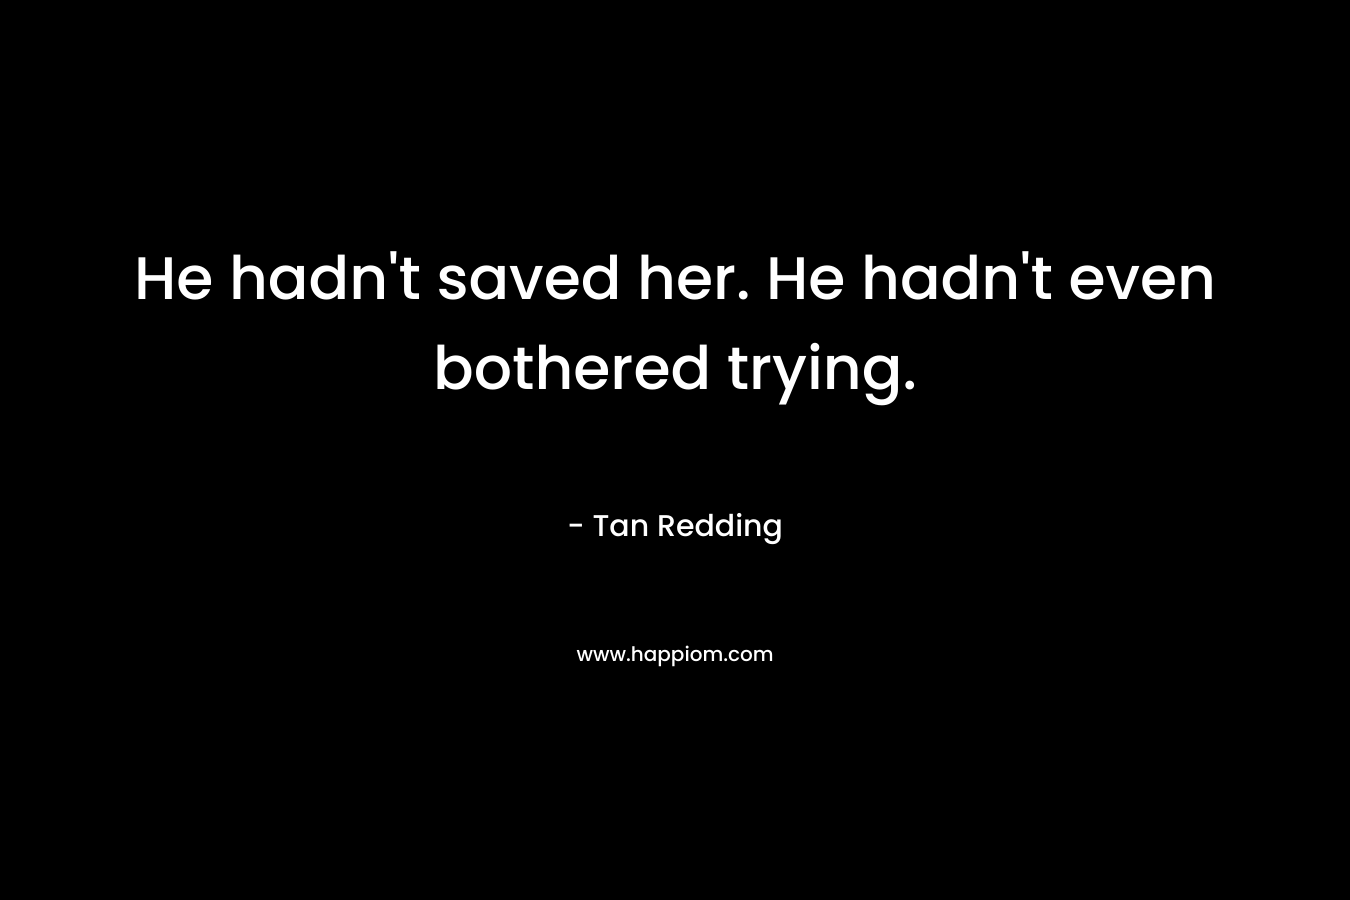 He hadn't saved her. He hadn't even bothered trying.